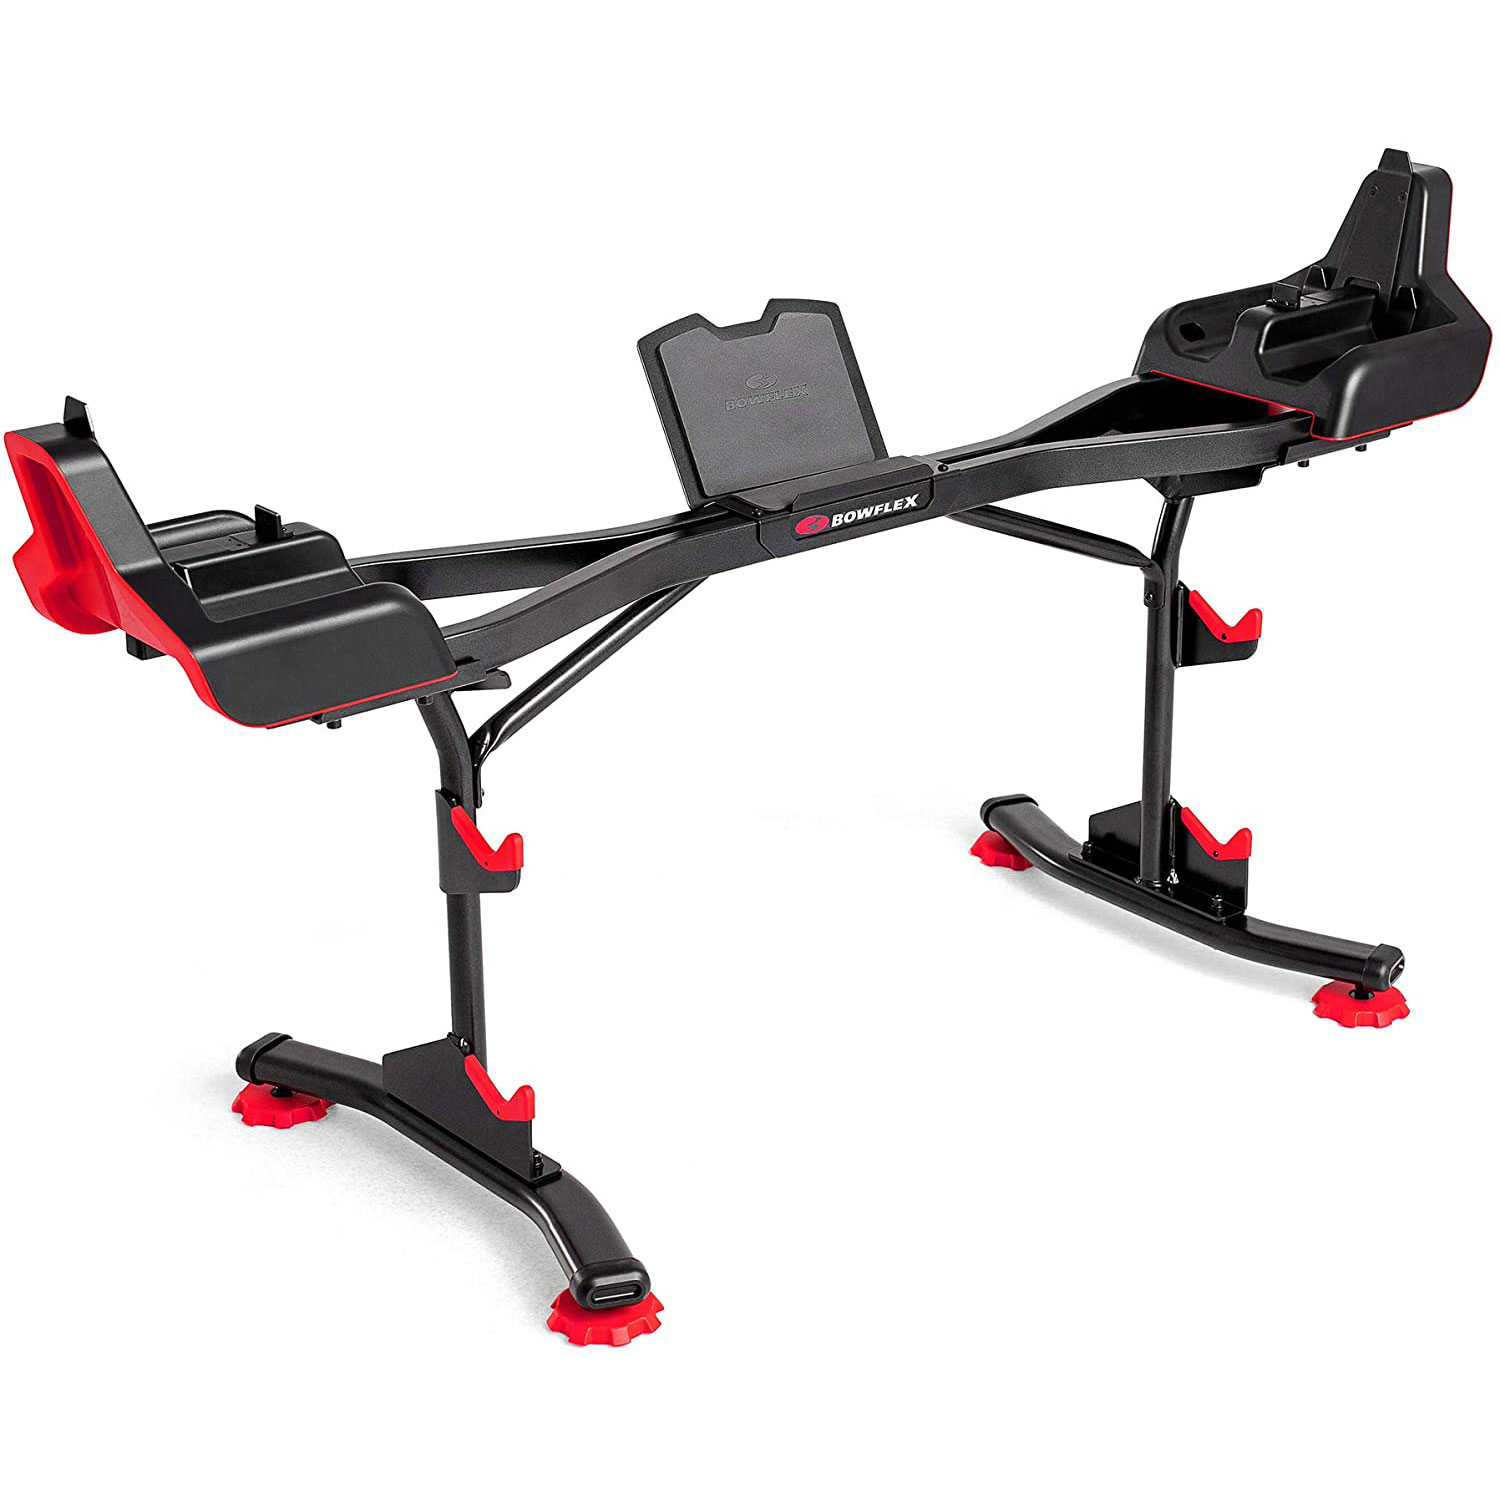 Bowflex SelectTech 2080 Stand with Media Rack for Barbell and Curl Bar - image 4 of 5